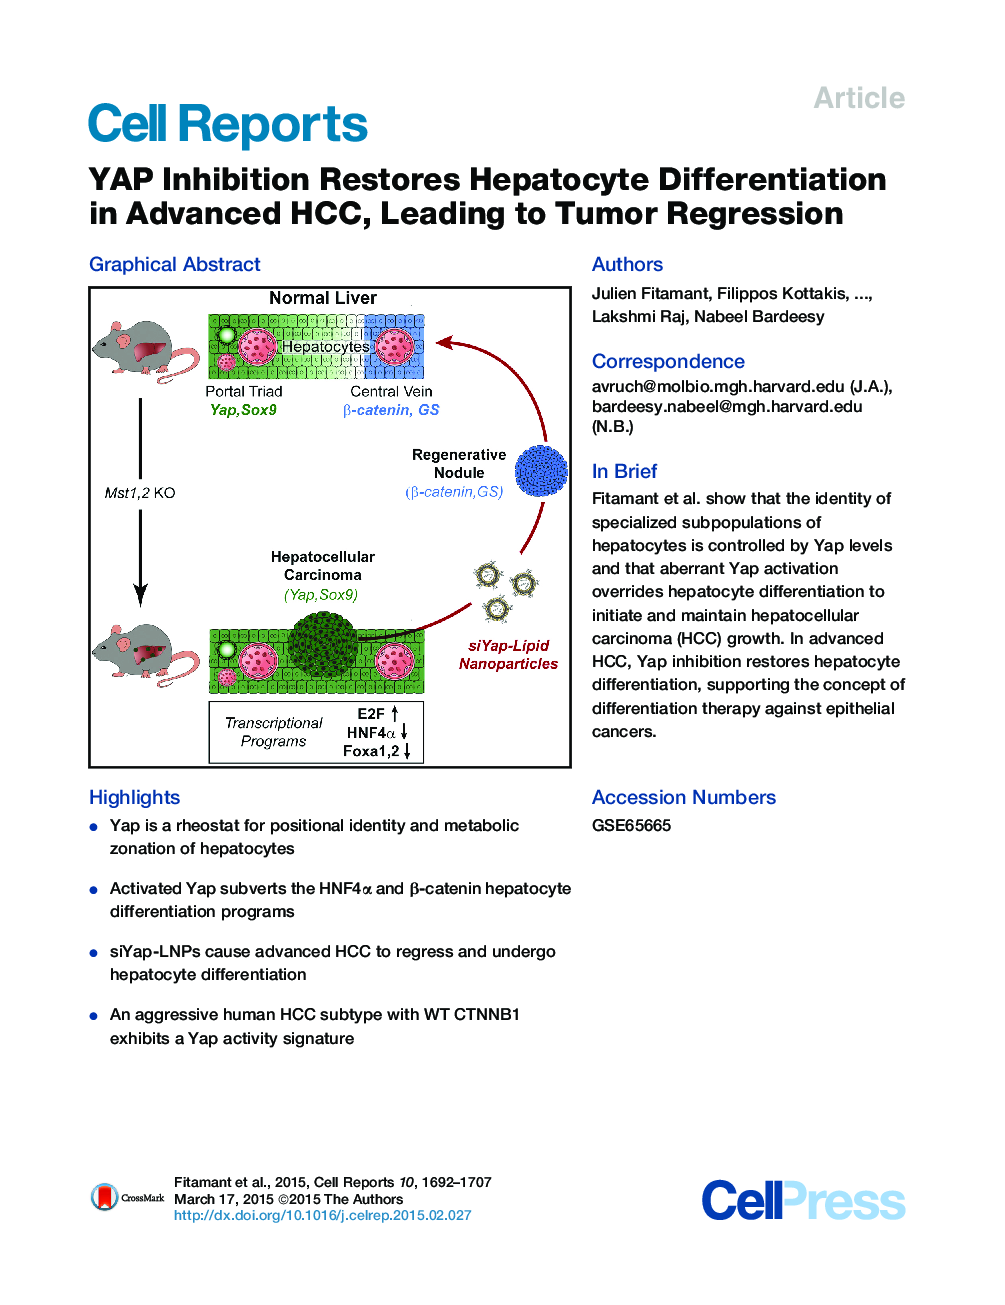 YAP Inhibition Restores Hepatocyte Differentiation in Advanced HCC, Leading to Tumor Regression 